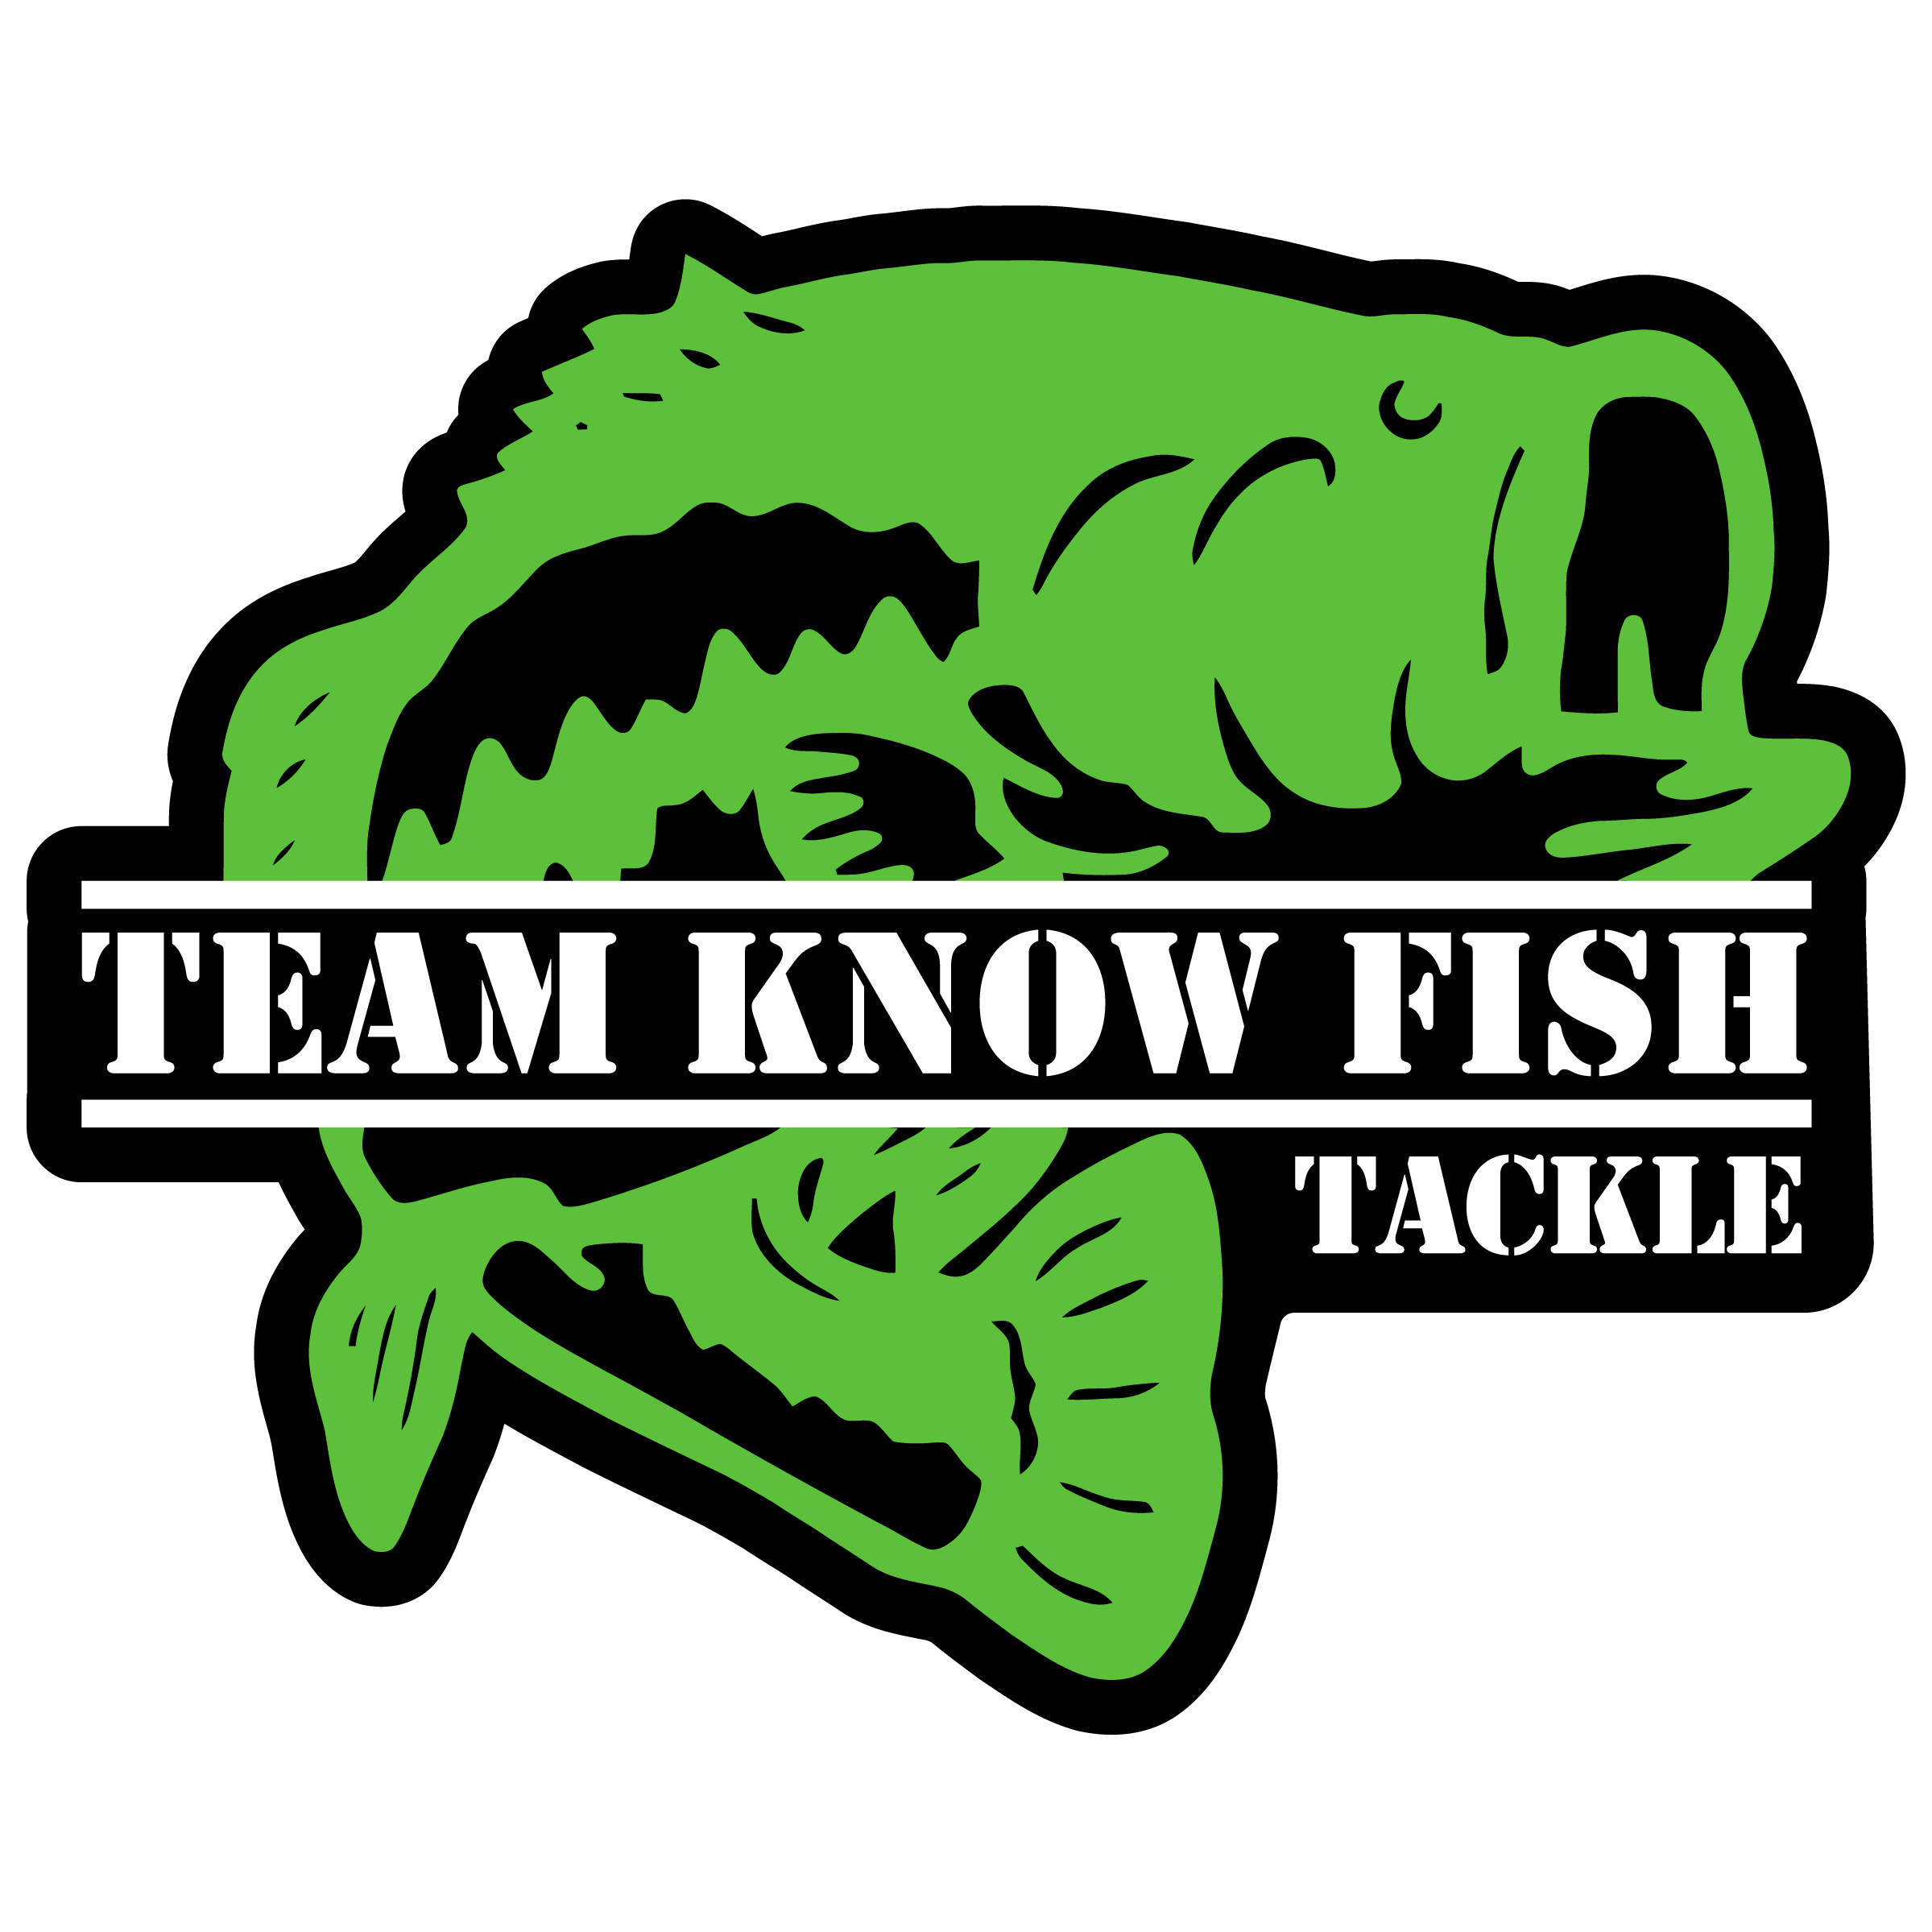 Shop All Products Here!!! discount, GetQuotenow - Teamknowfish Tackle